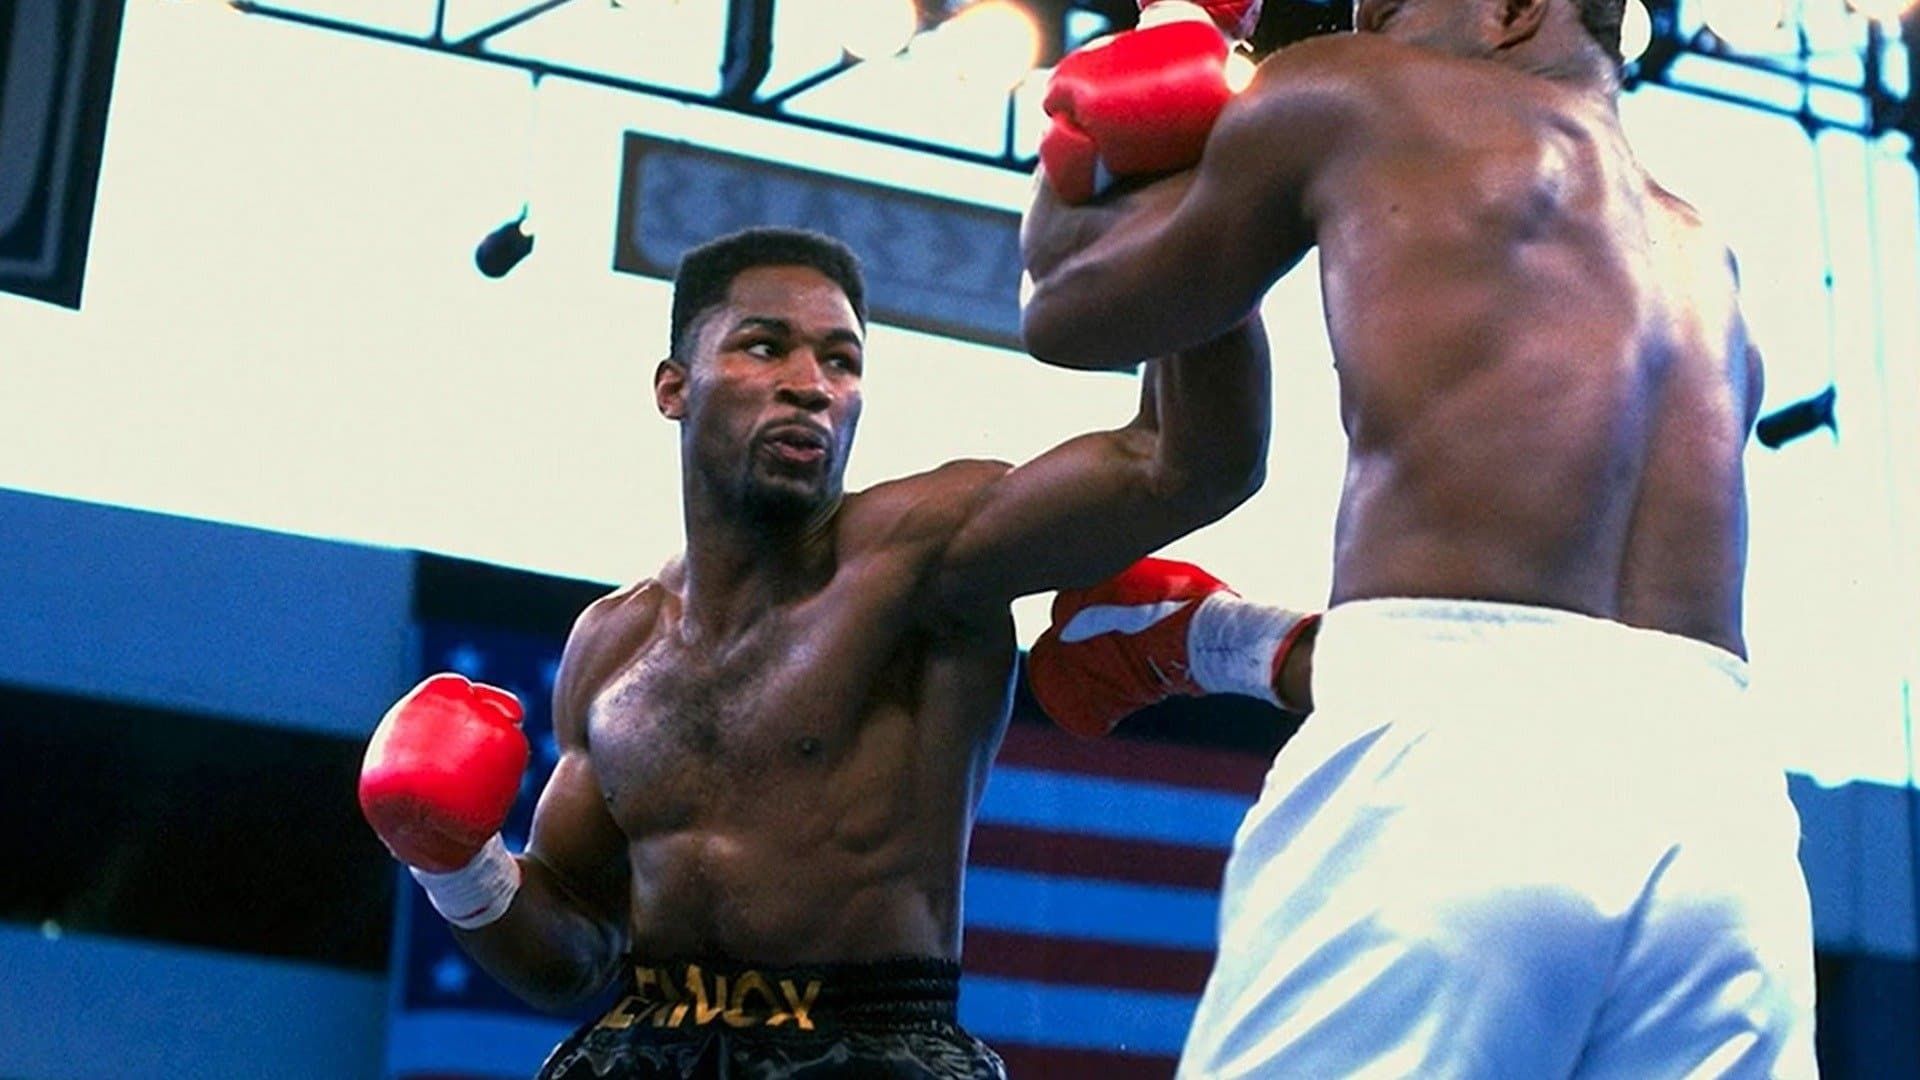 Lennox Lewis: The Untold Story background